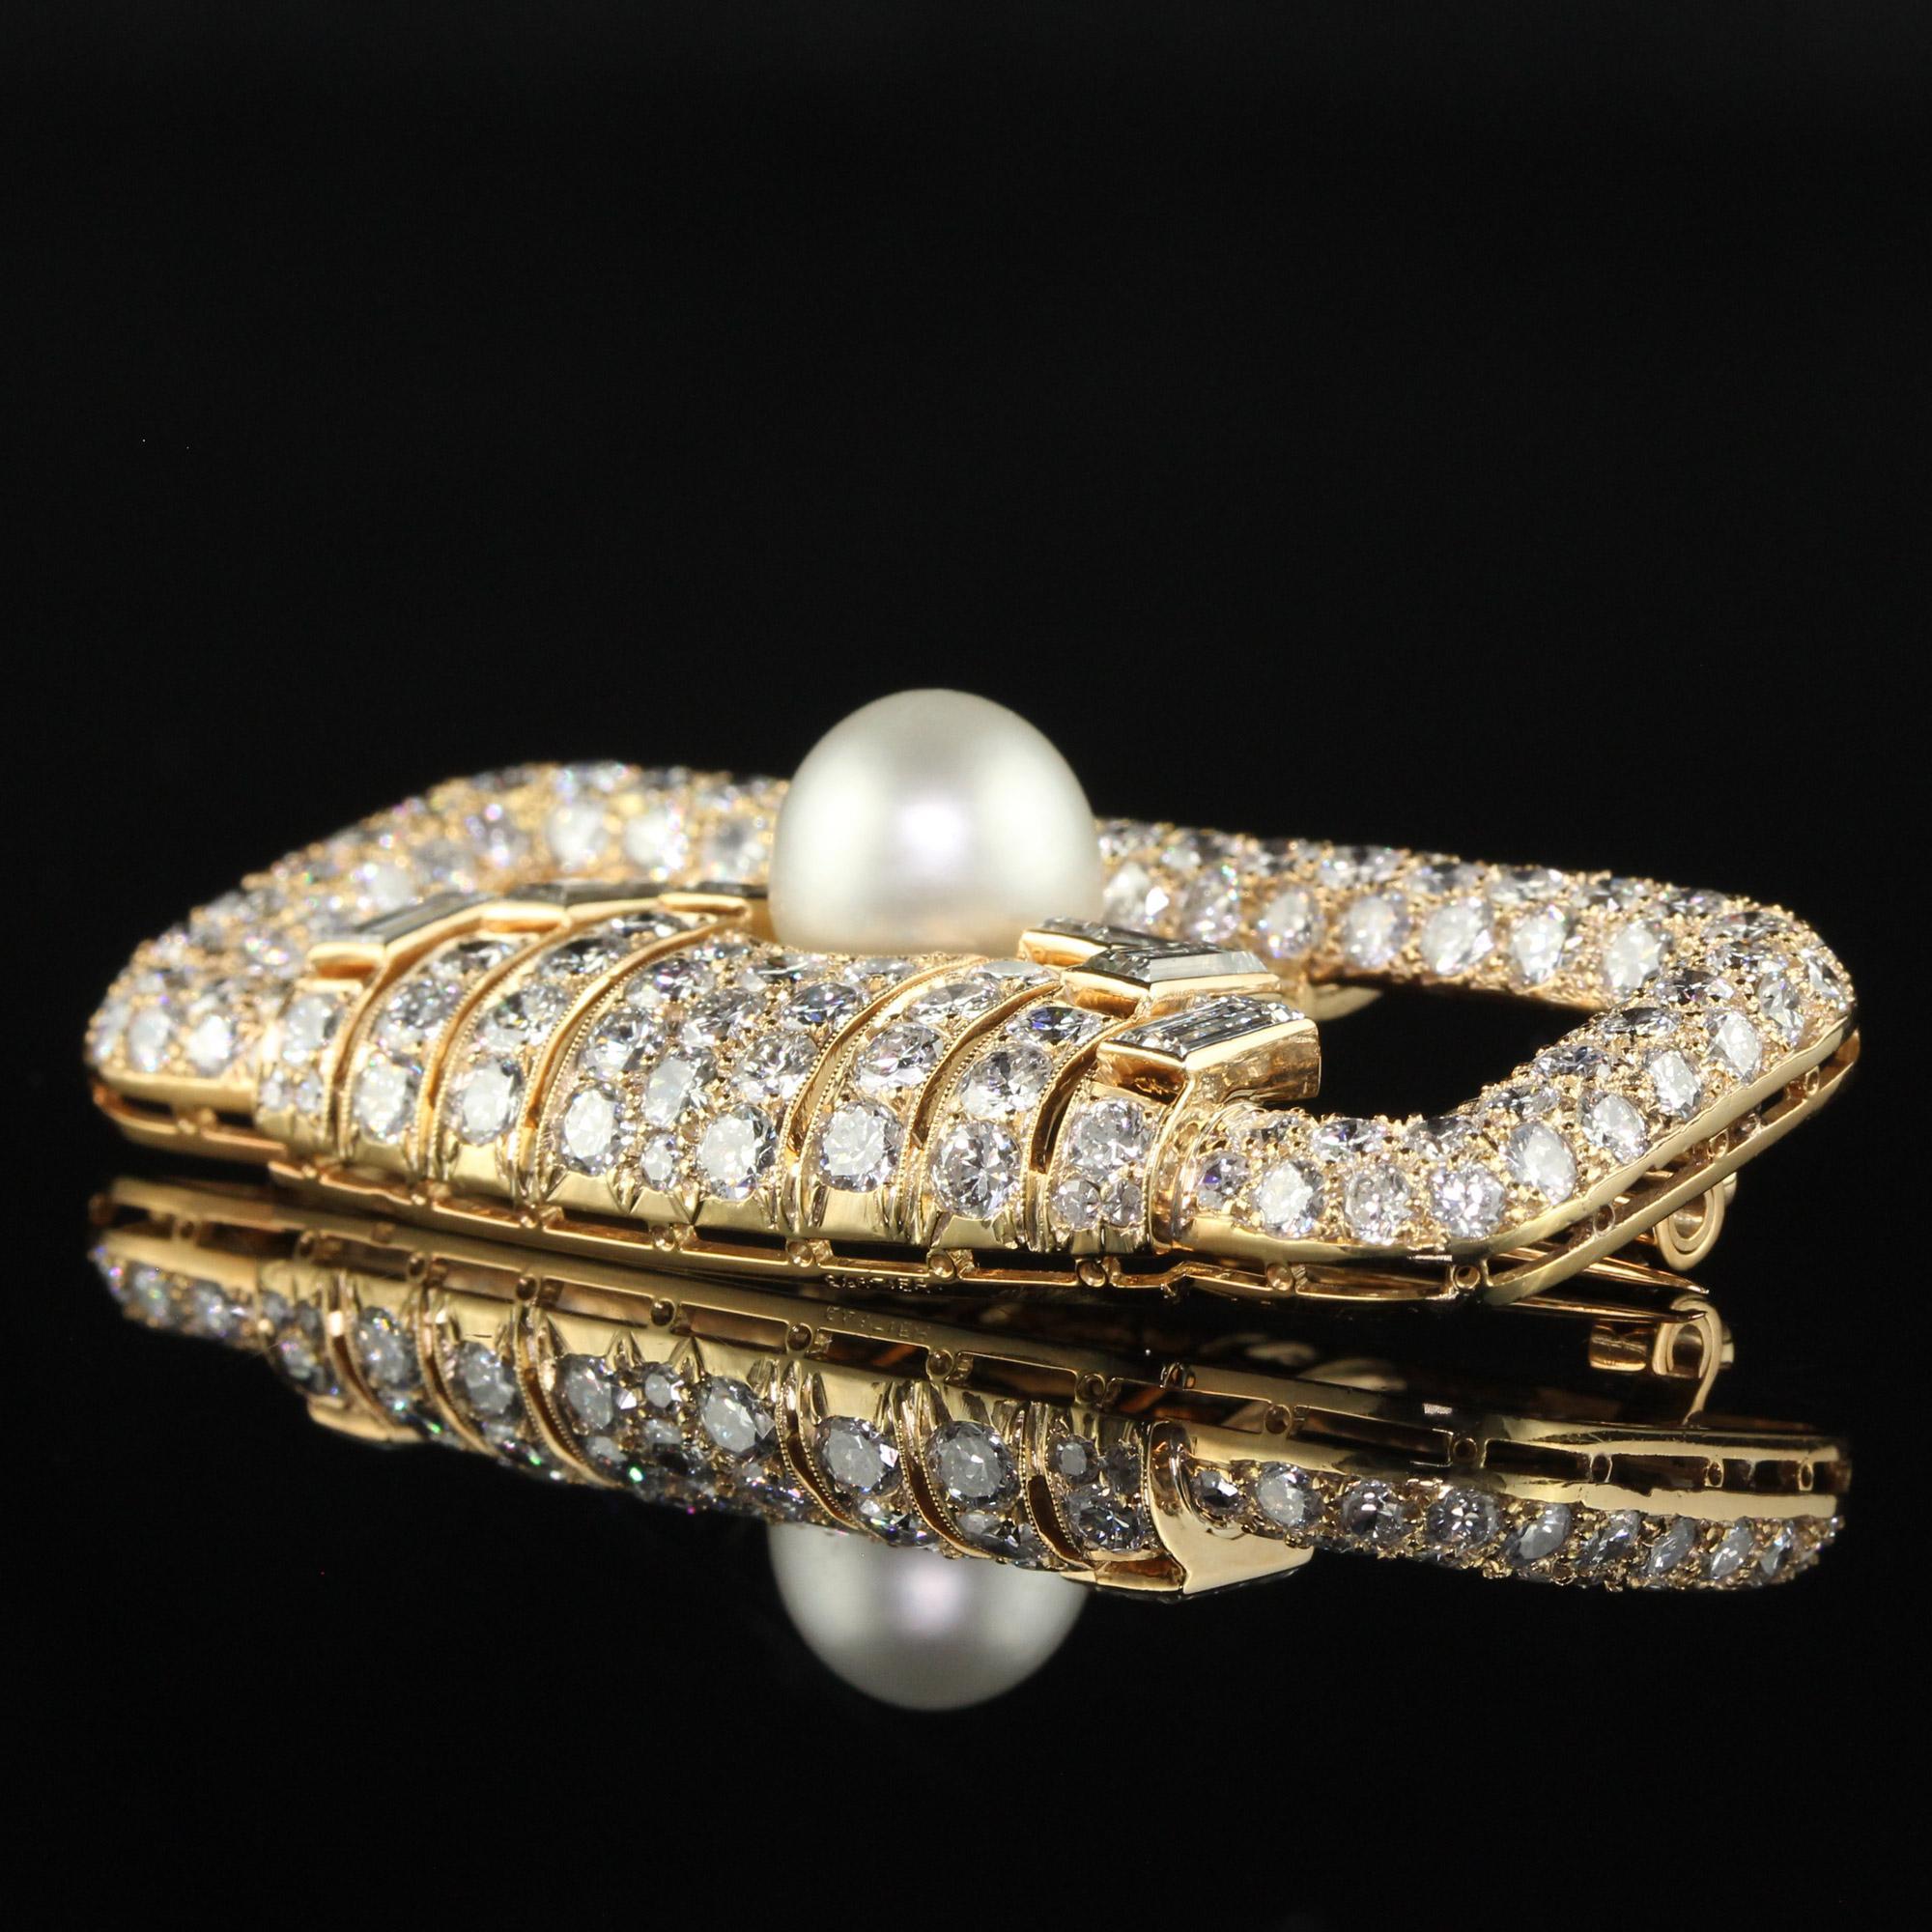 Vintage Retro Cartier 18K Yellow Gold Diamond Natural Pearl Brooch Pin - GIA For Sale 5